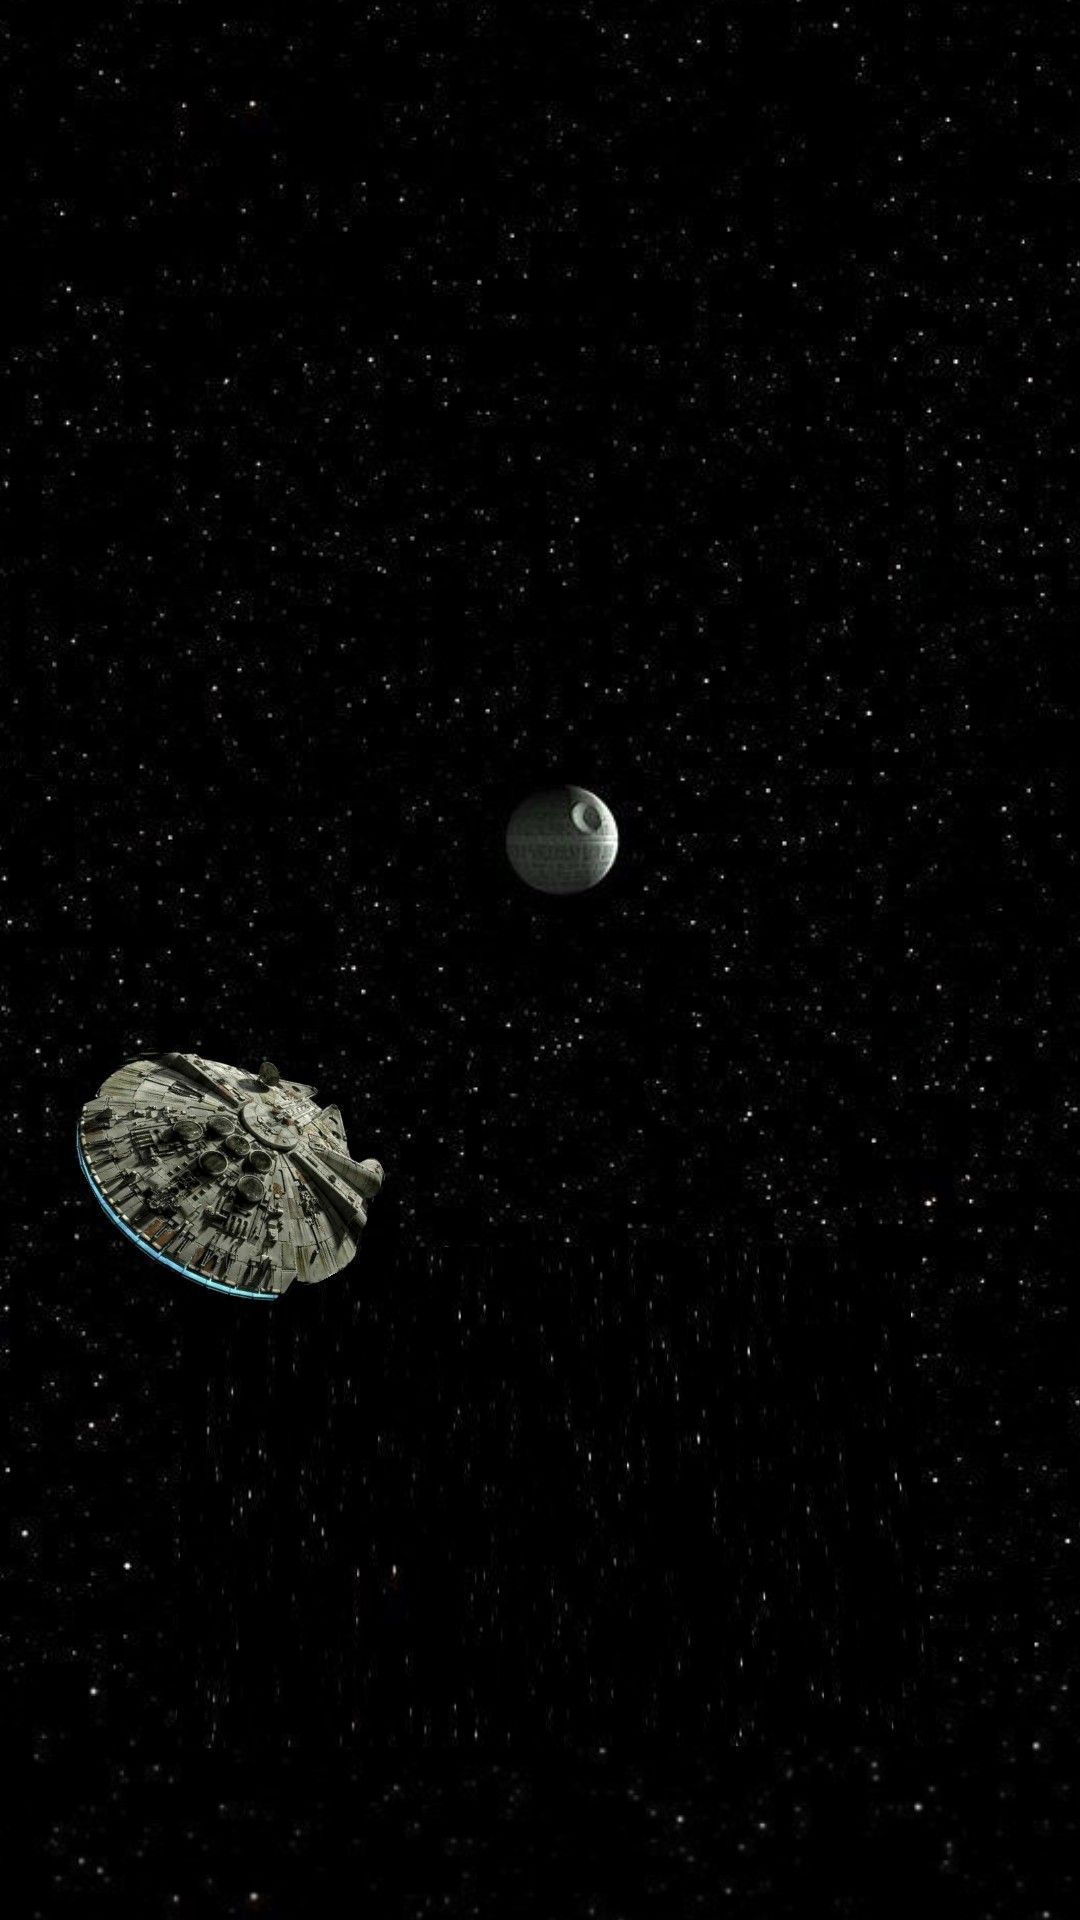 Thats no moon its a space station. Star wars wallpaper iphone, Star wars wallpaper, Star wars background